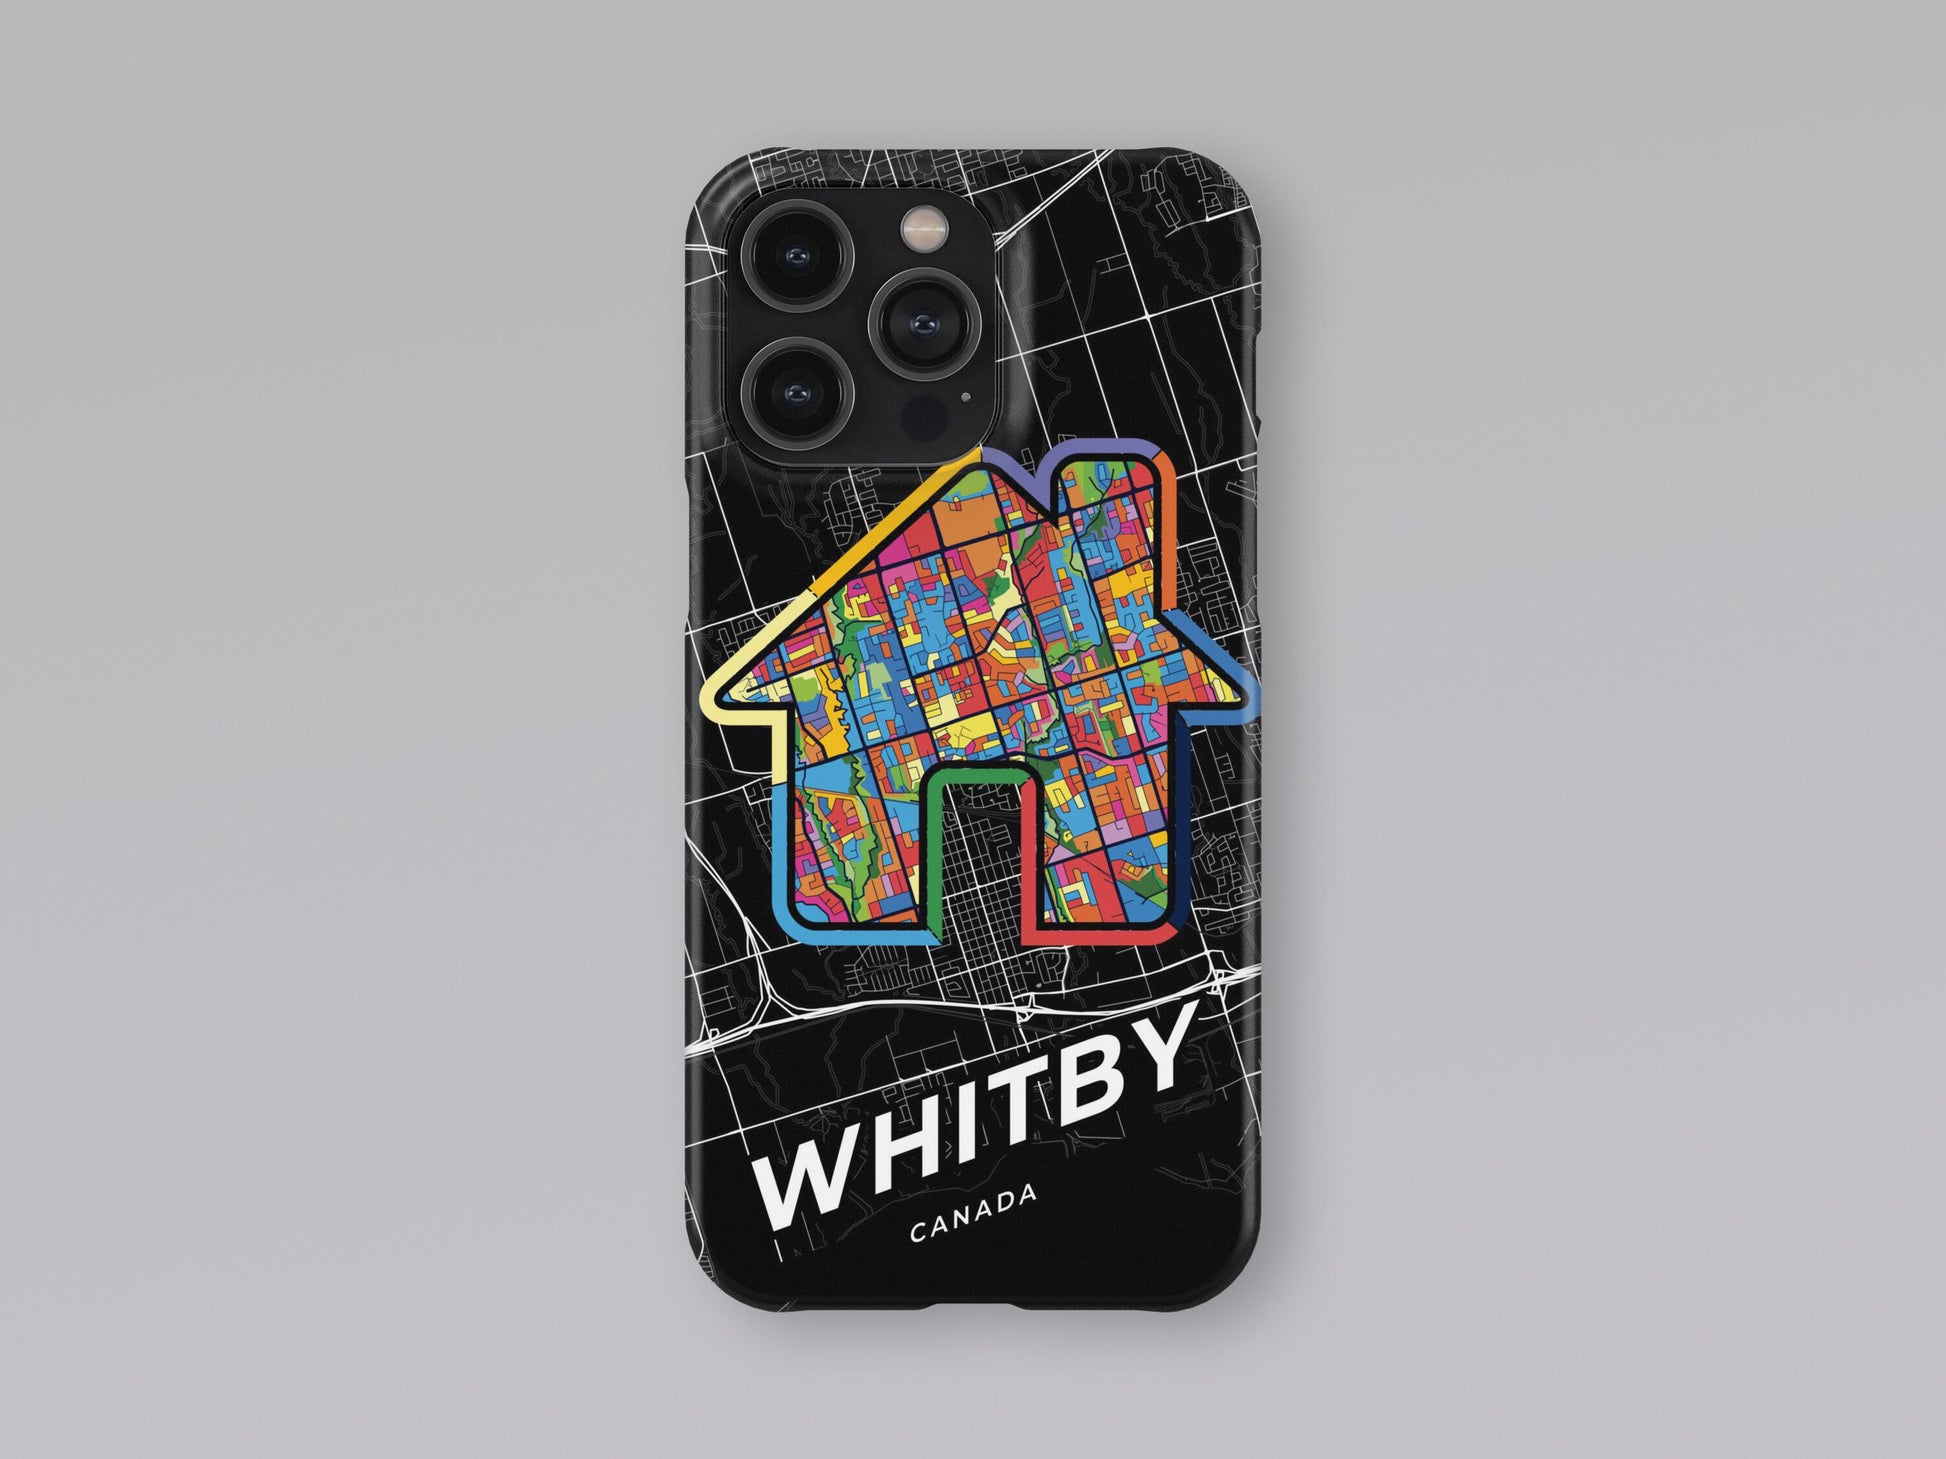 Whitby Canada slim phone case with colorful icon 3